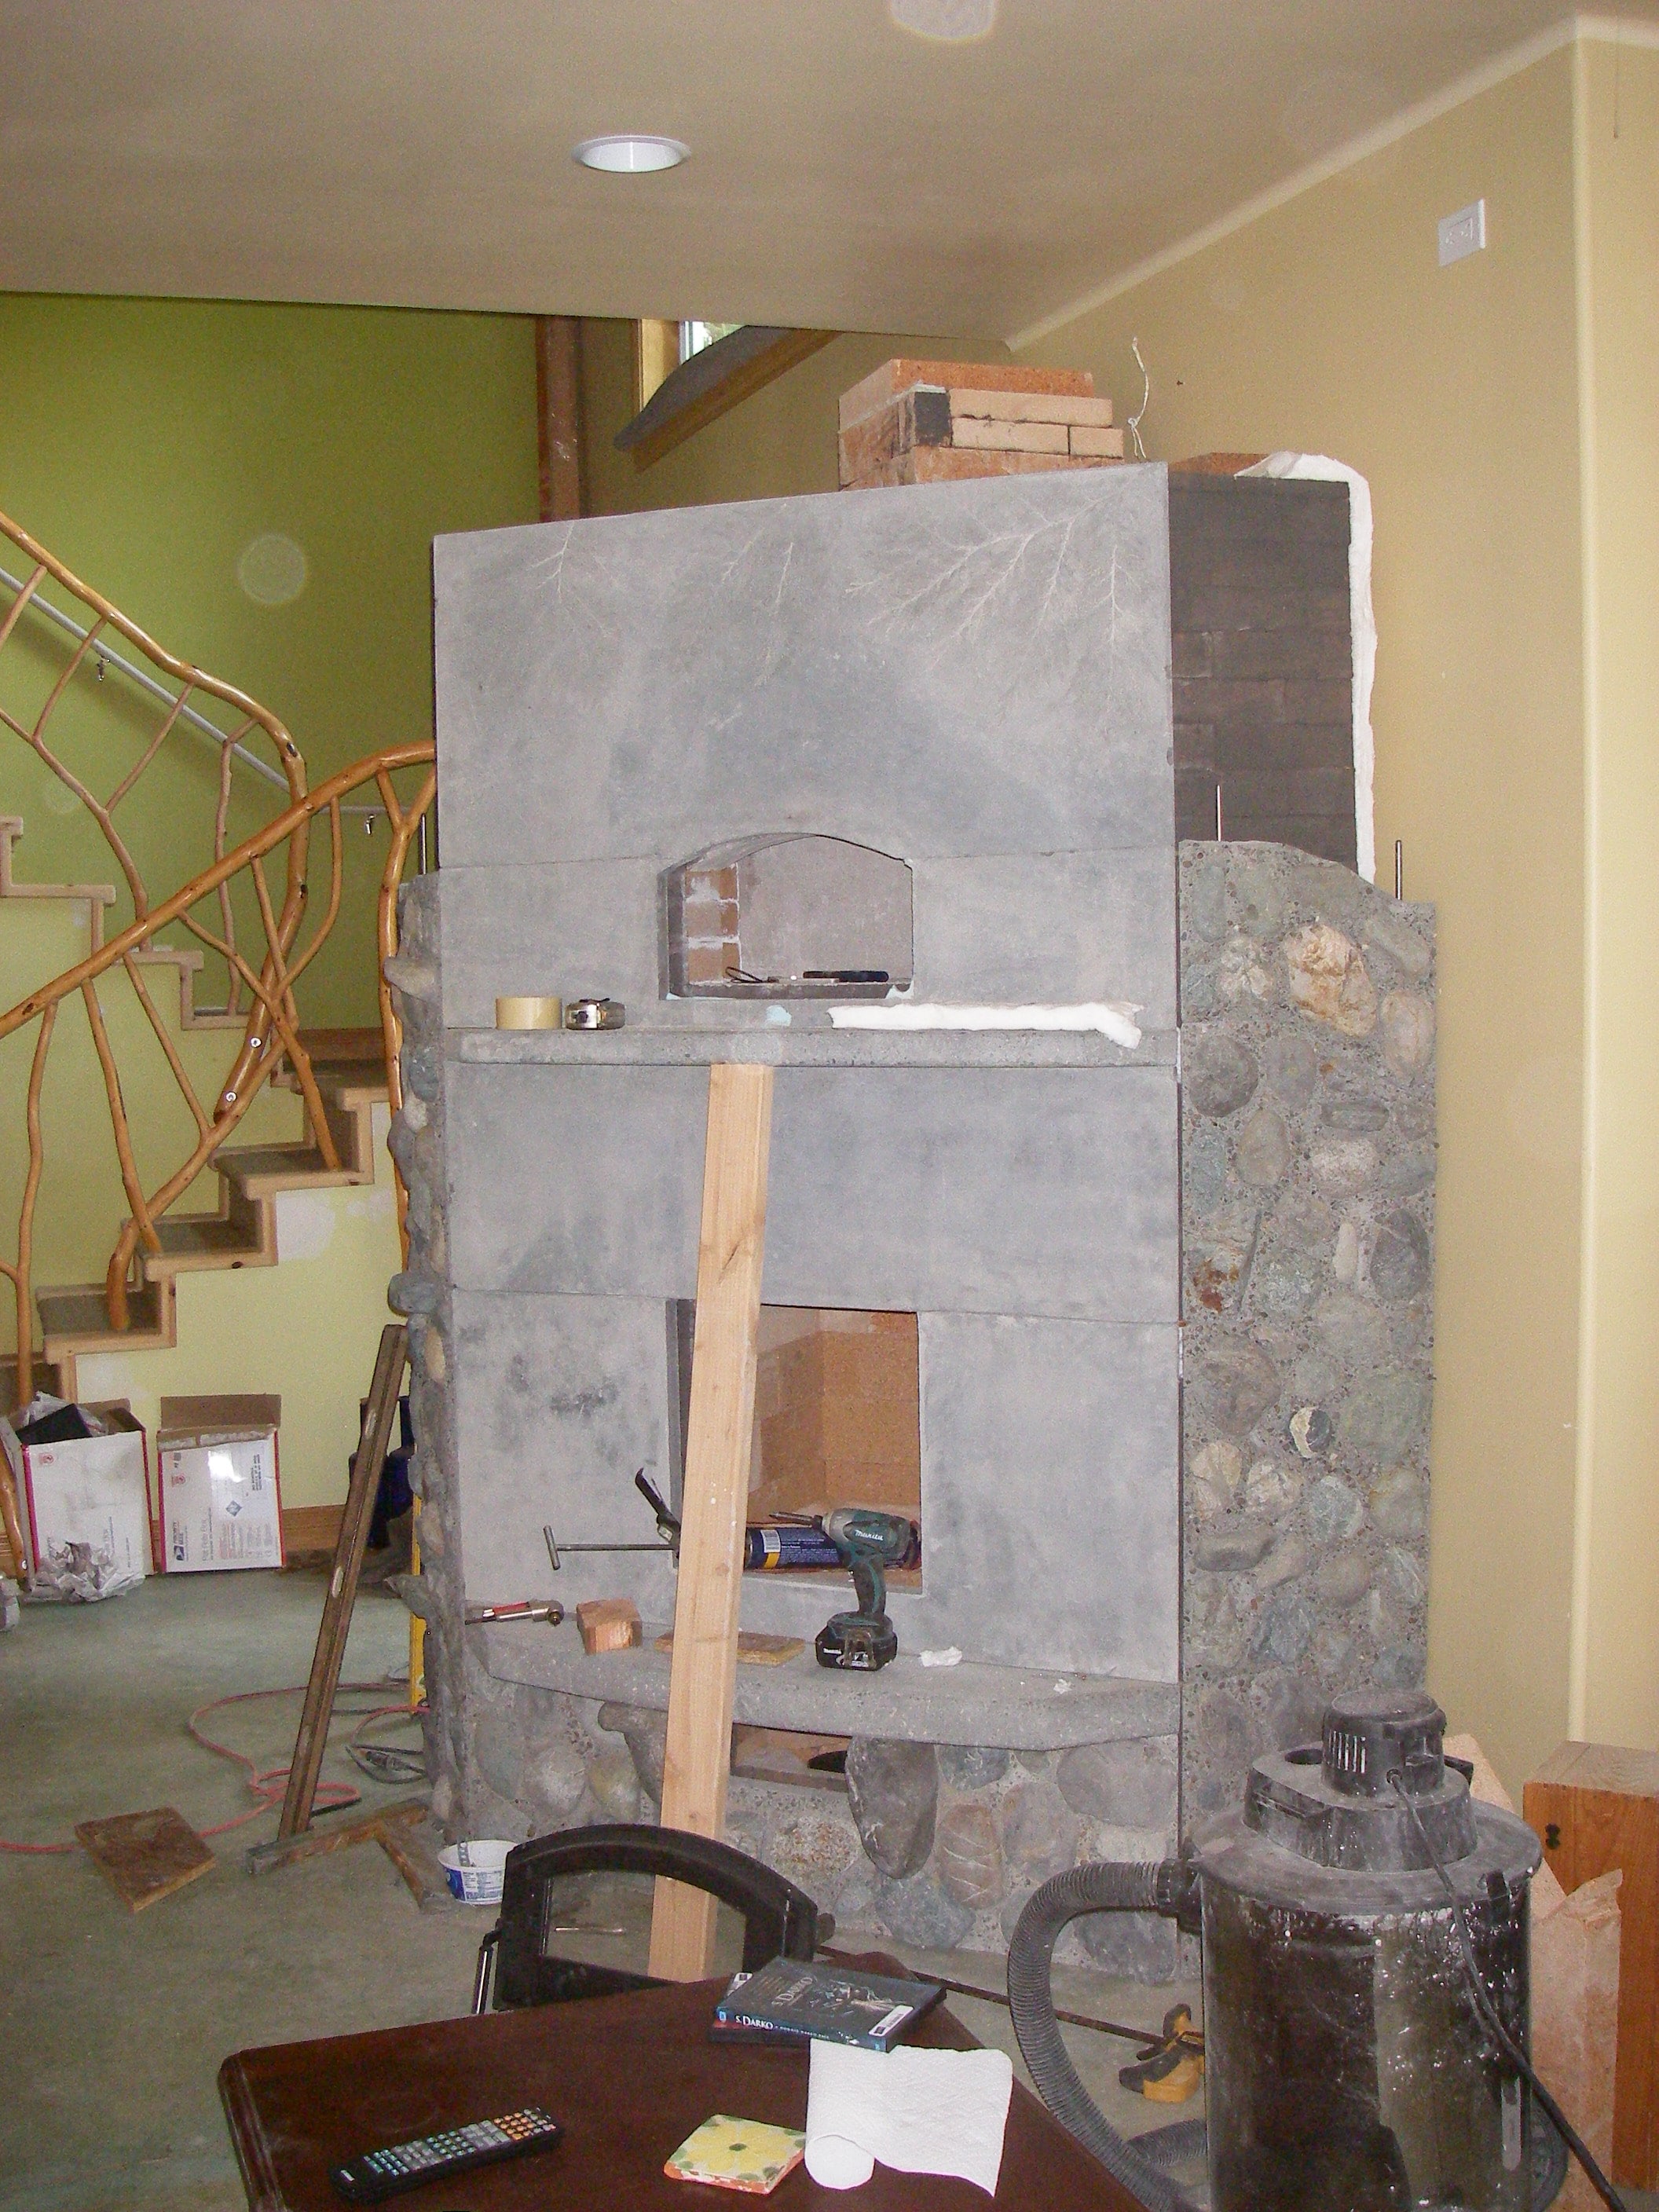 Construction of a Finnish Fireplace in progress